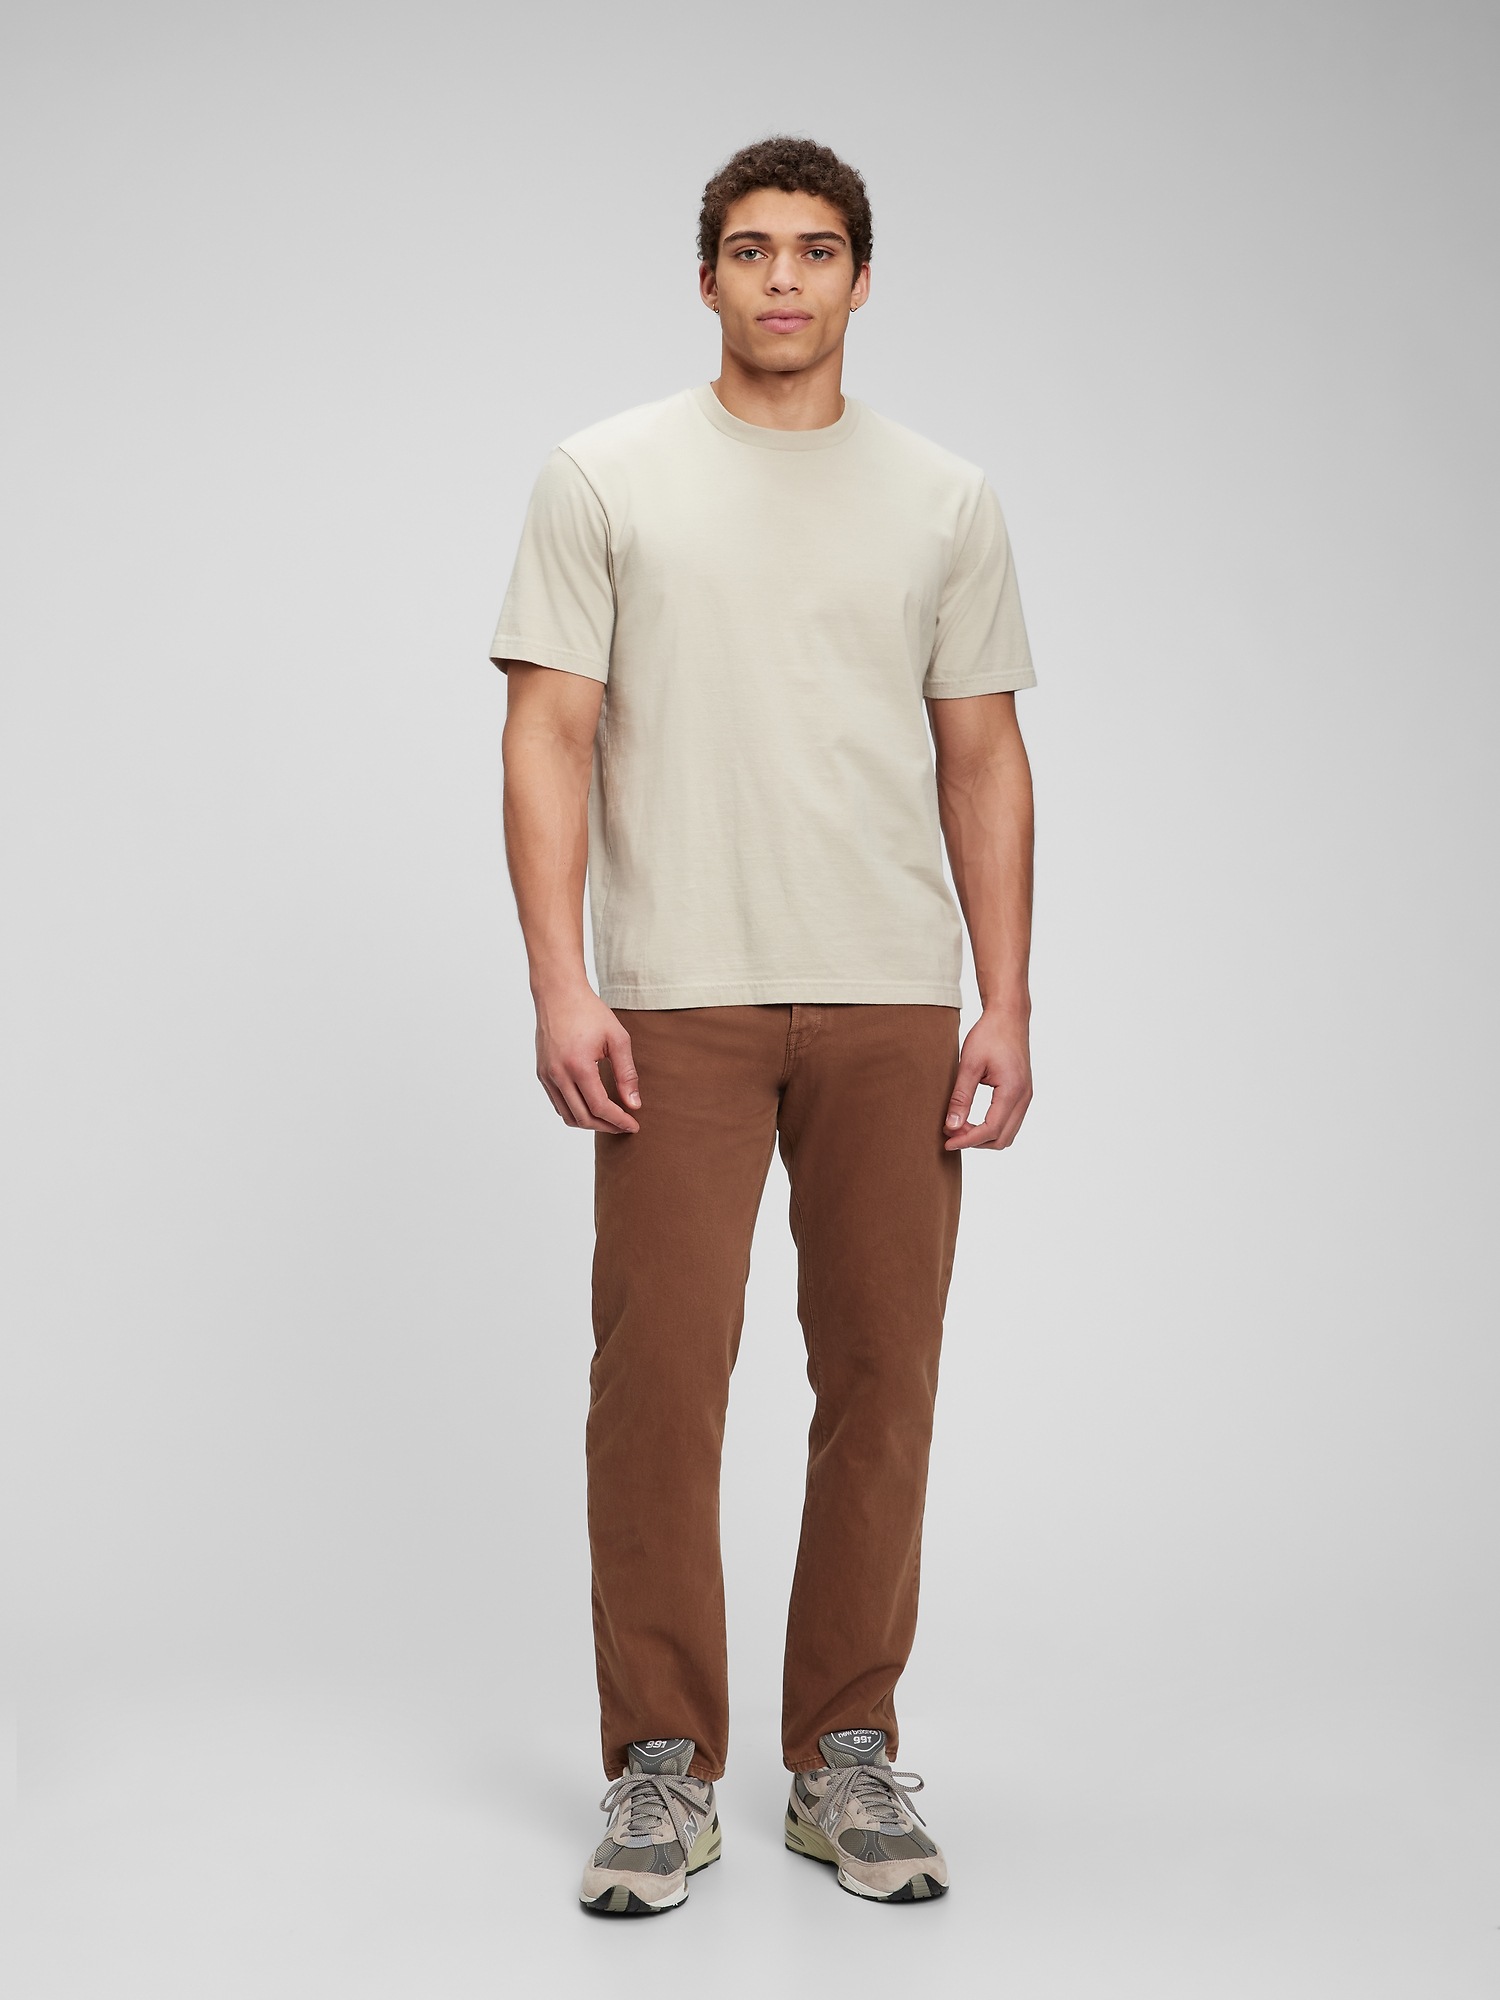 Gap Original Straight Fit Jeans with Washwell